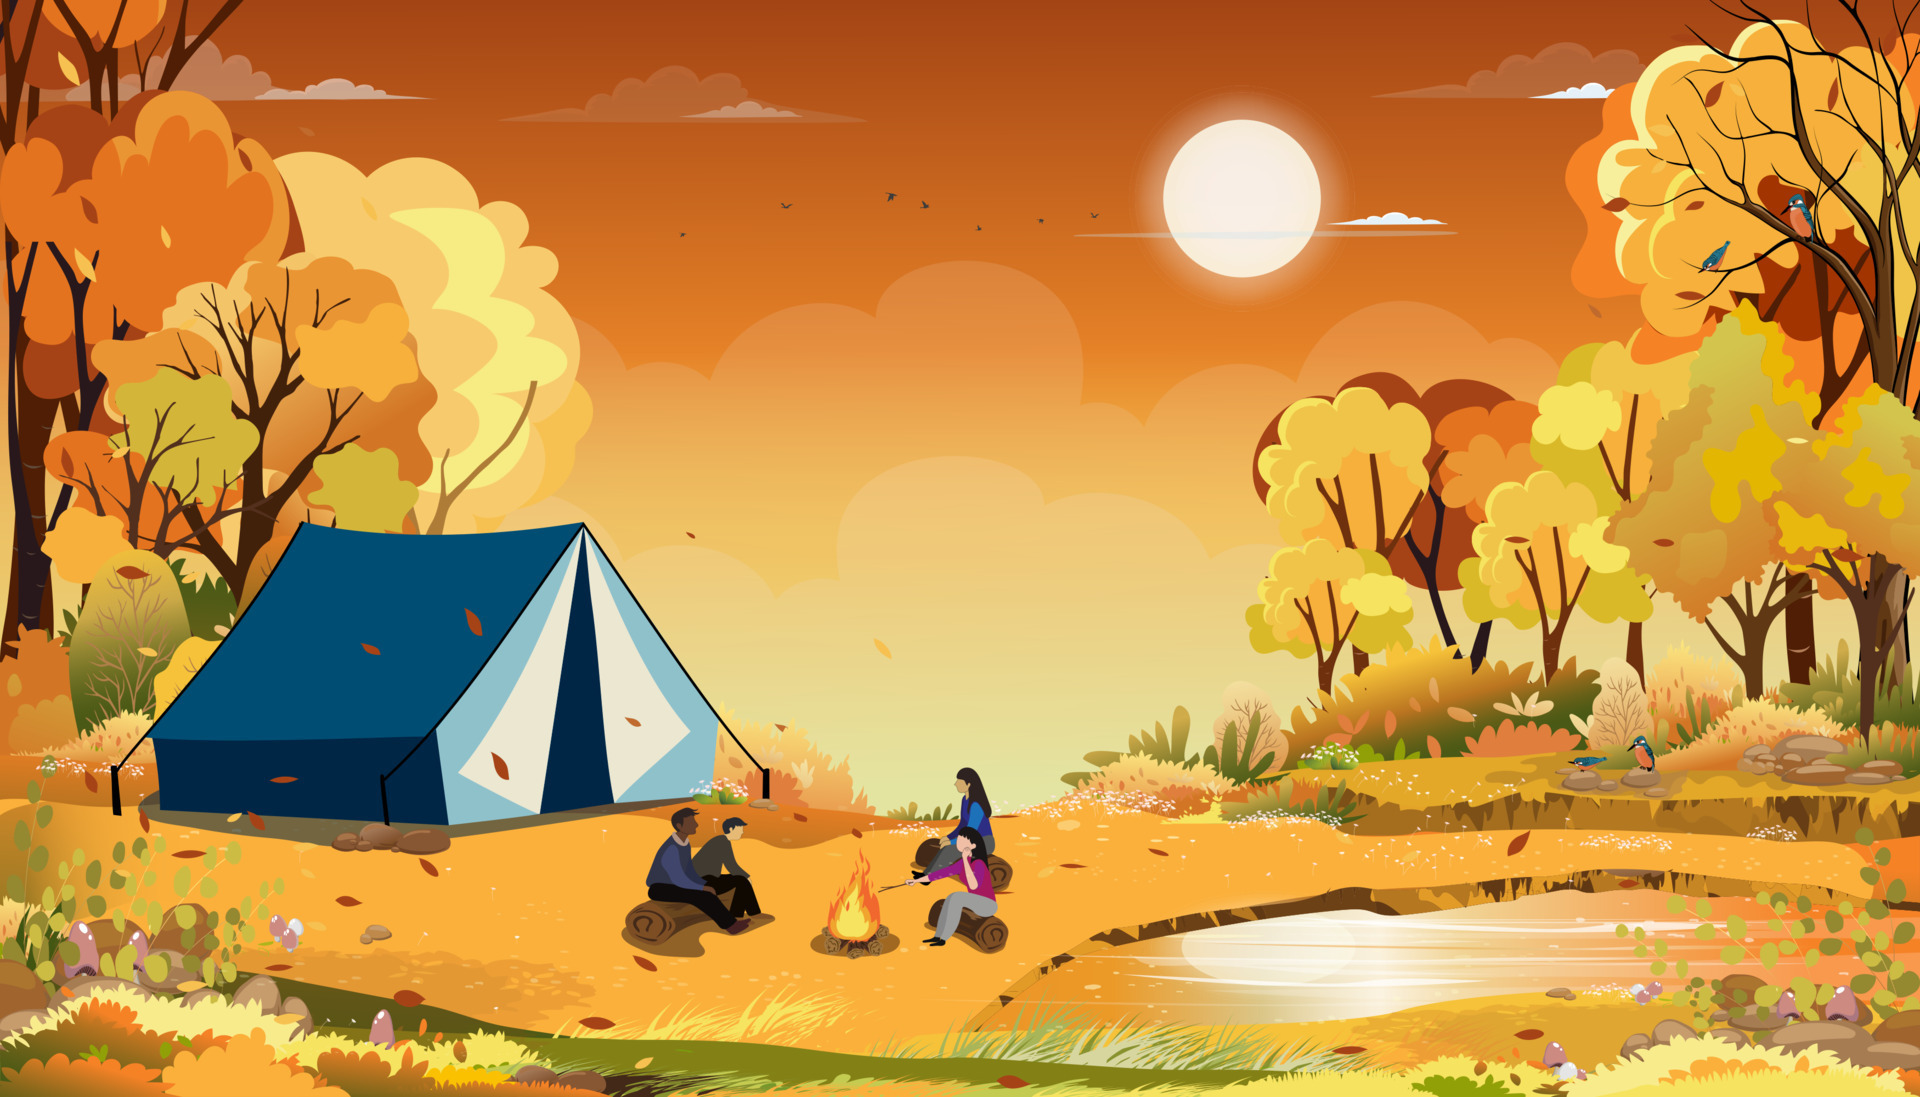 Family enjoying vacation camping at countryside in Autumn, Group of People sitting near the tent and campfire having fun talking together, Vector Rural landscape in fall forest tree with sunset sky Vector